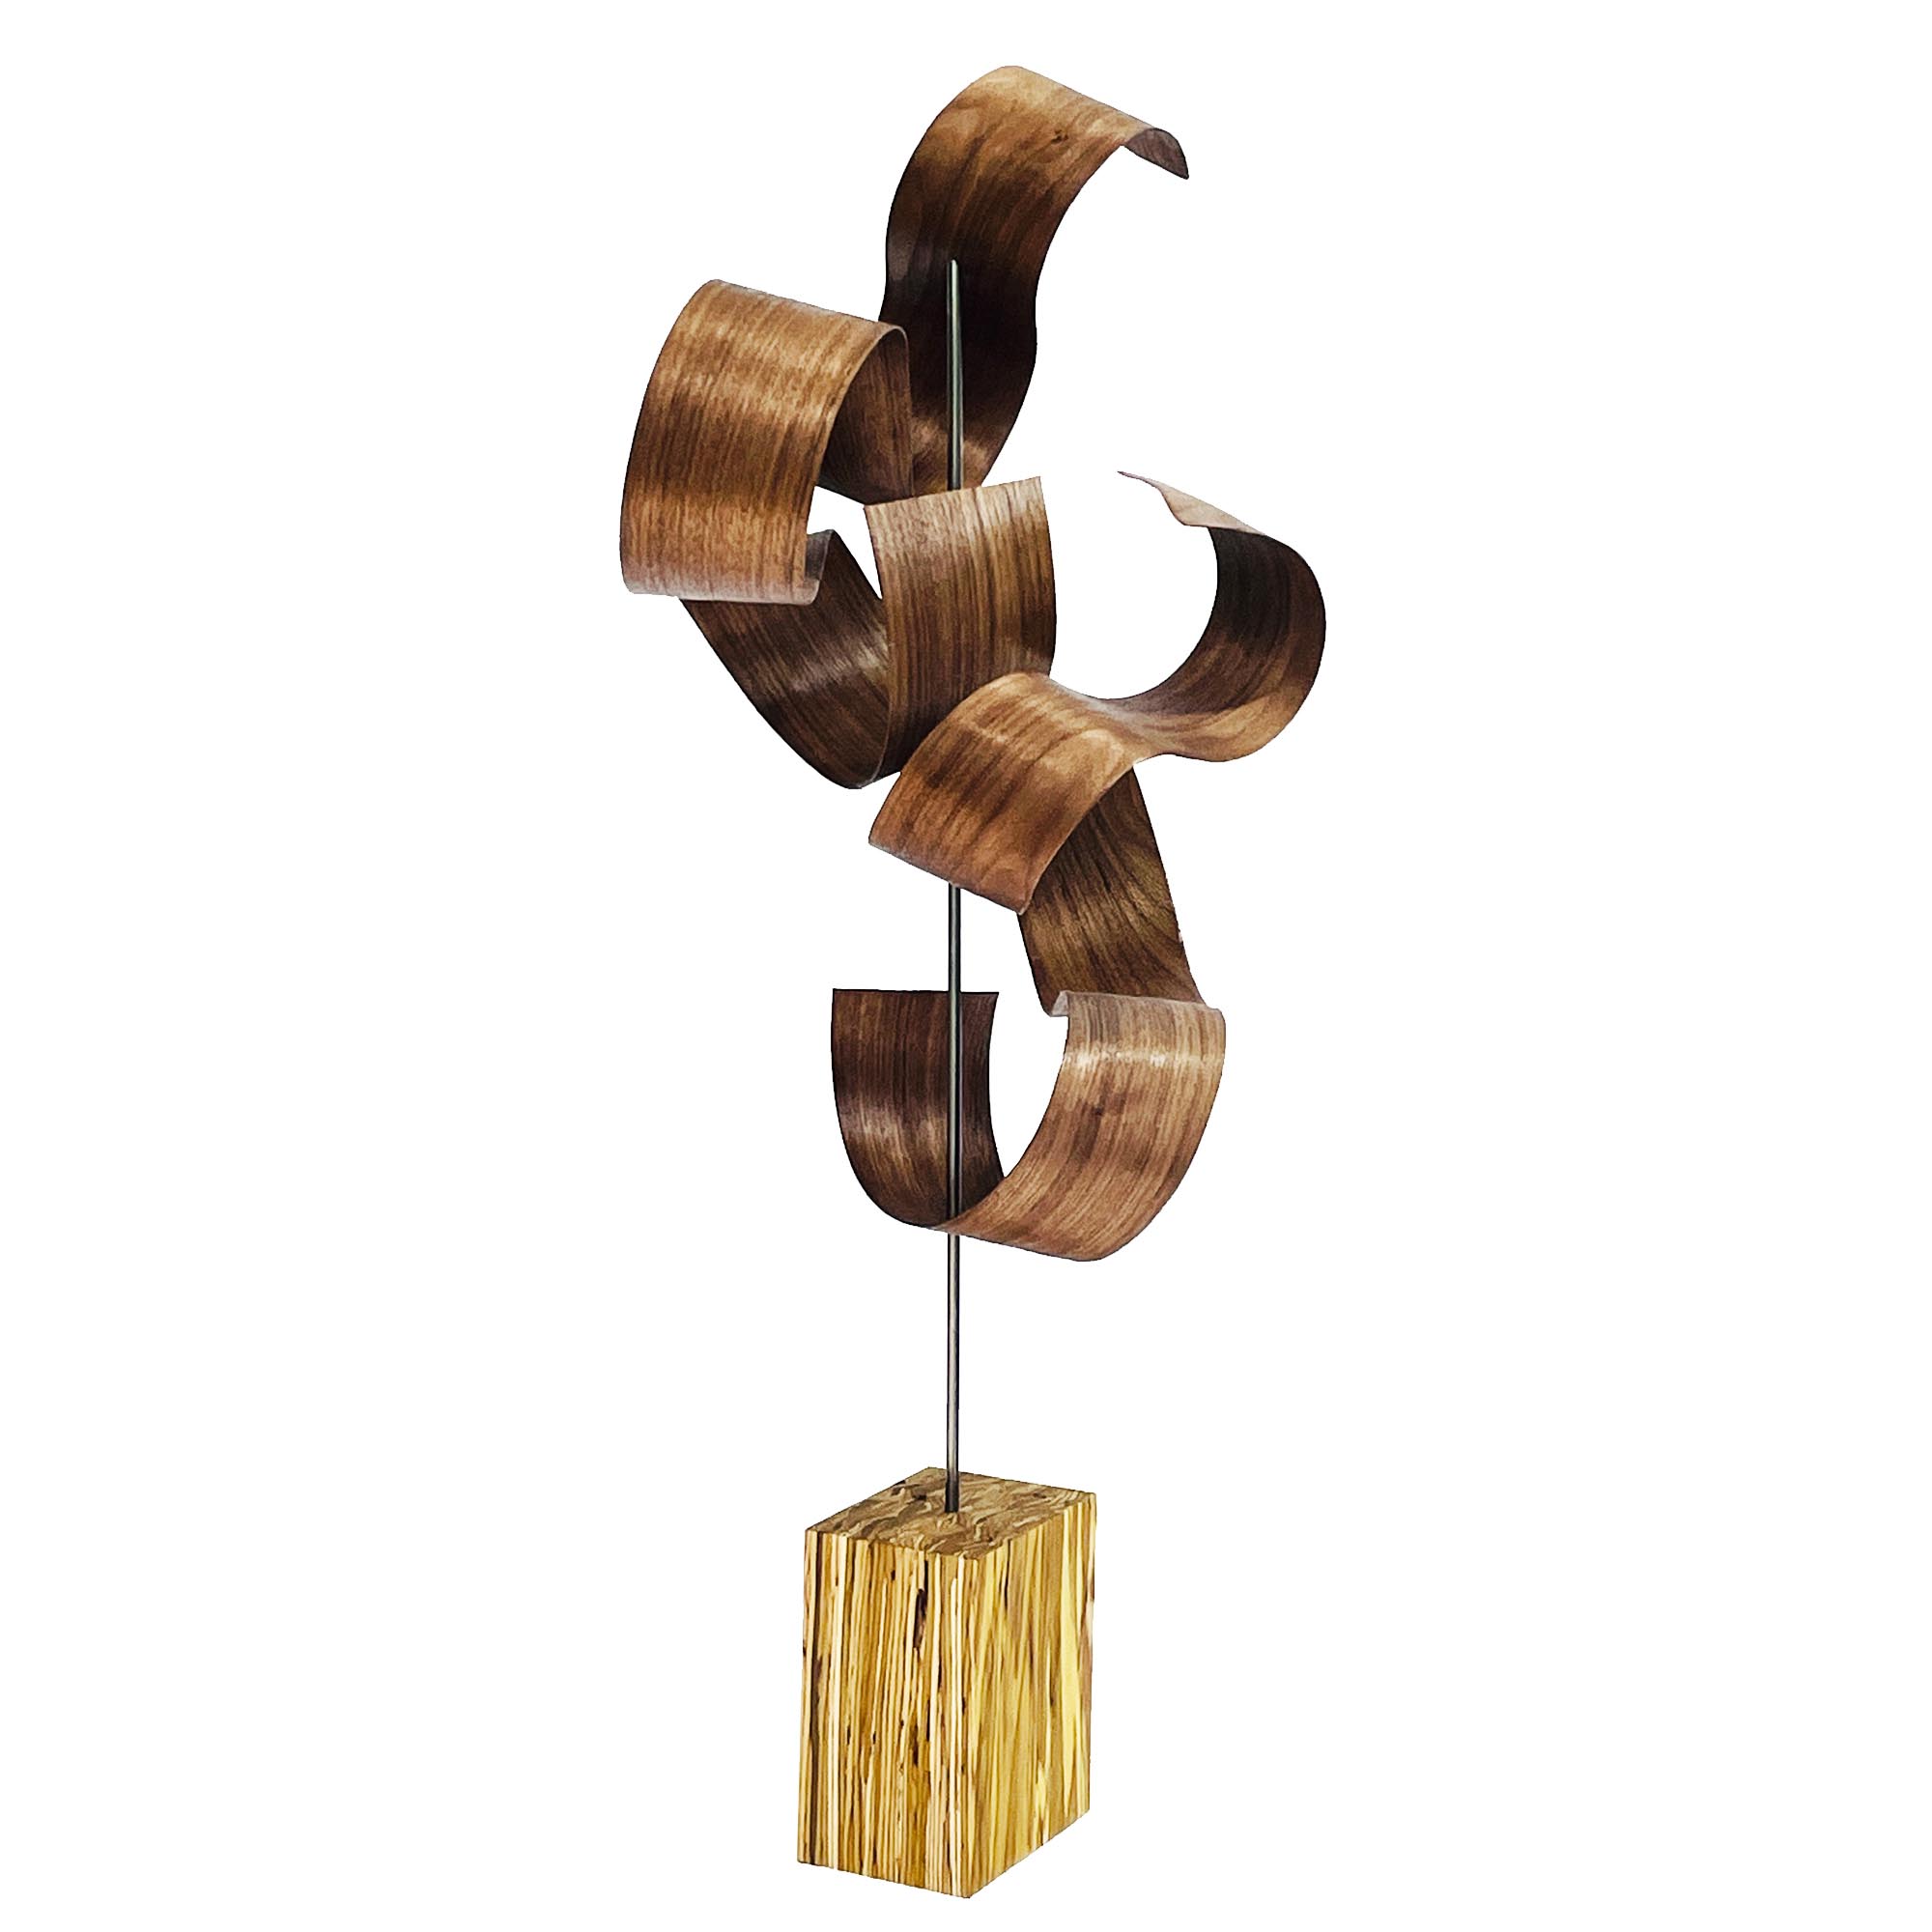 Wave Strand by Jackson Wright - Abstract Wood Sculpture, Kinetic Sculpture - Image 3